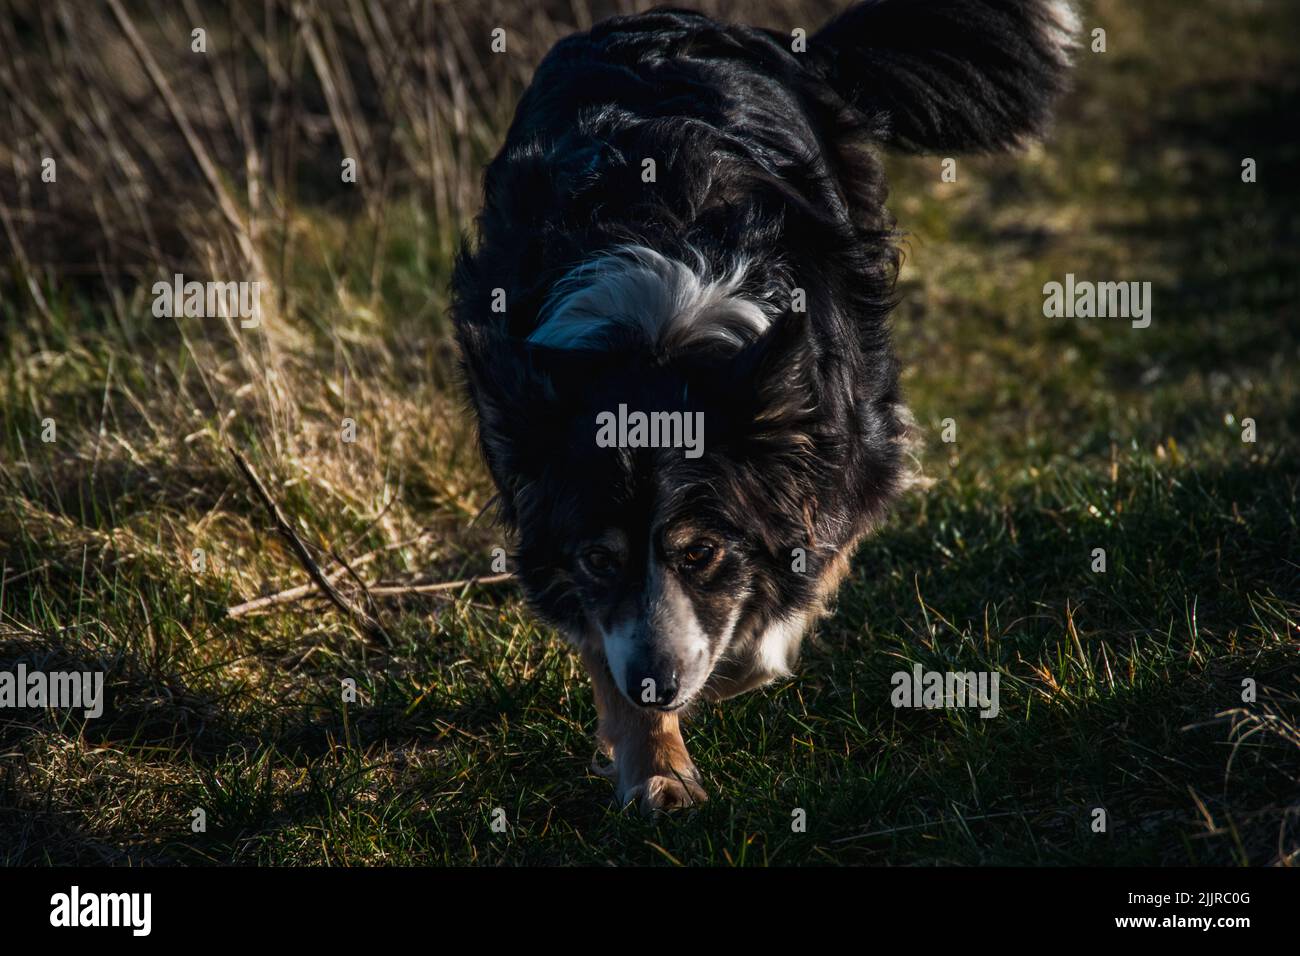 A black Border Collie running in a field on the green grass under the evening rays of sun. Stock Photo